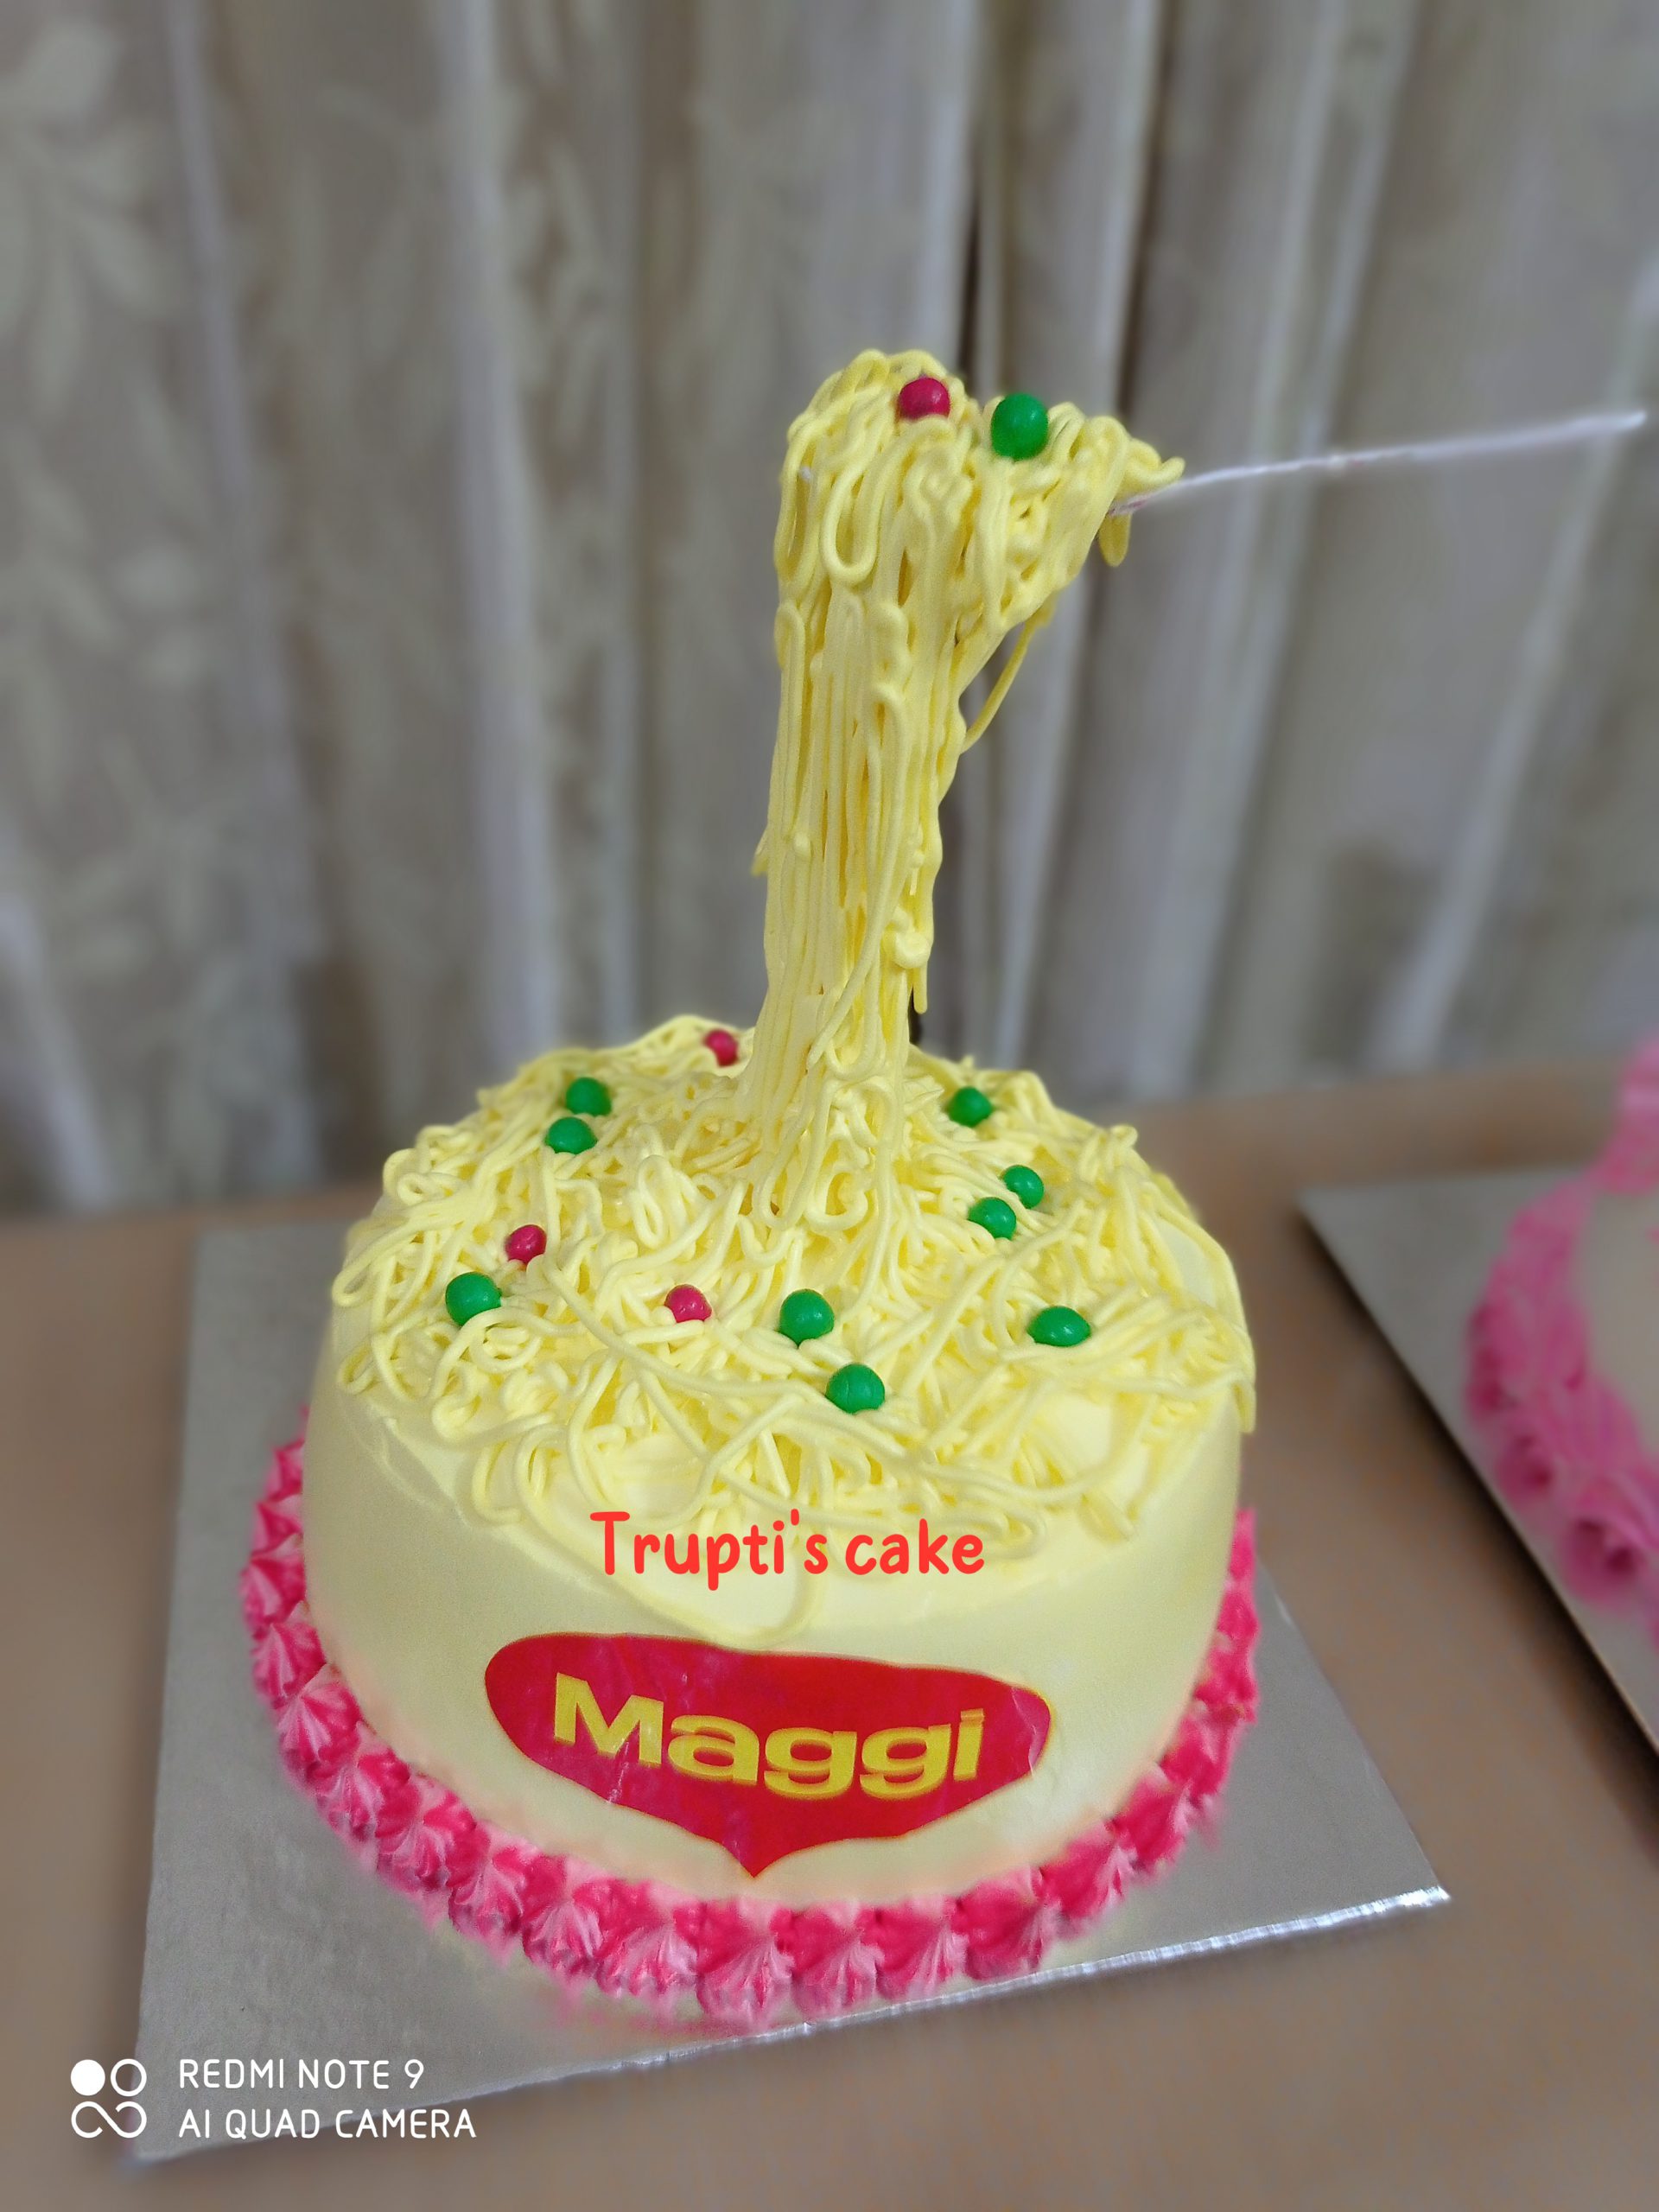 1.5 Kg Maggie Theme Cake in Dehu Road, PCMC, Pune | Delivery Date: 11 Oct 2021Today Evening by 7 pm Designs, Images, Price Near Me